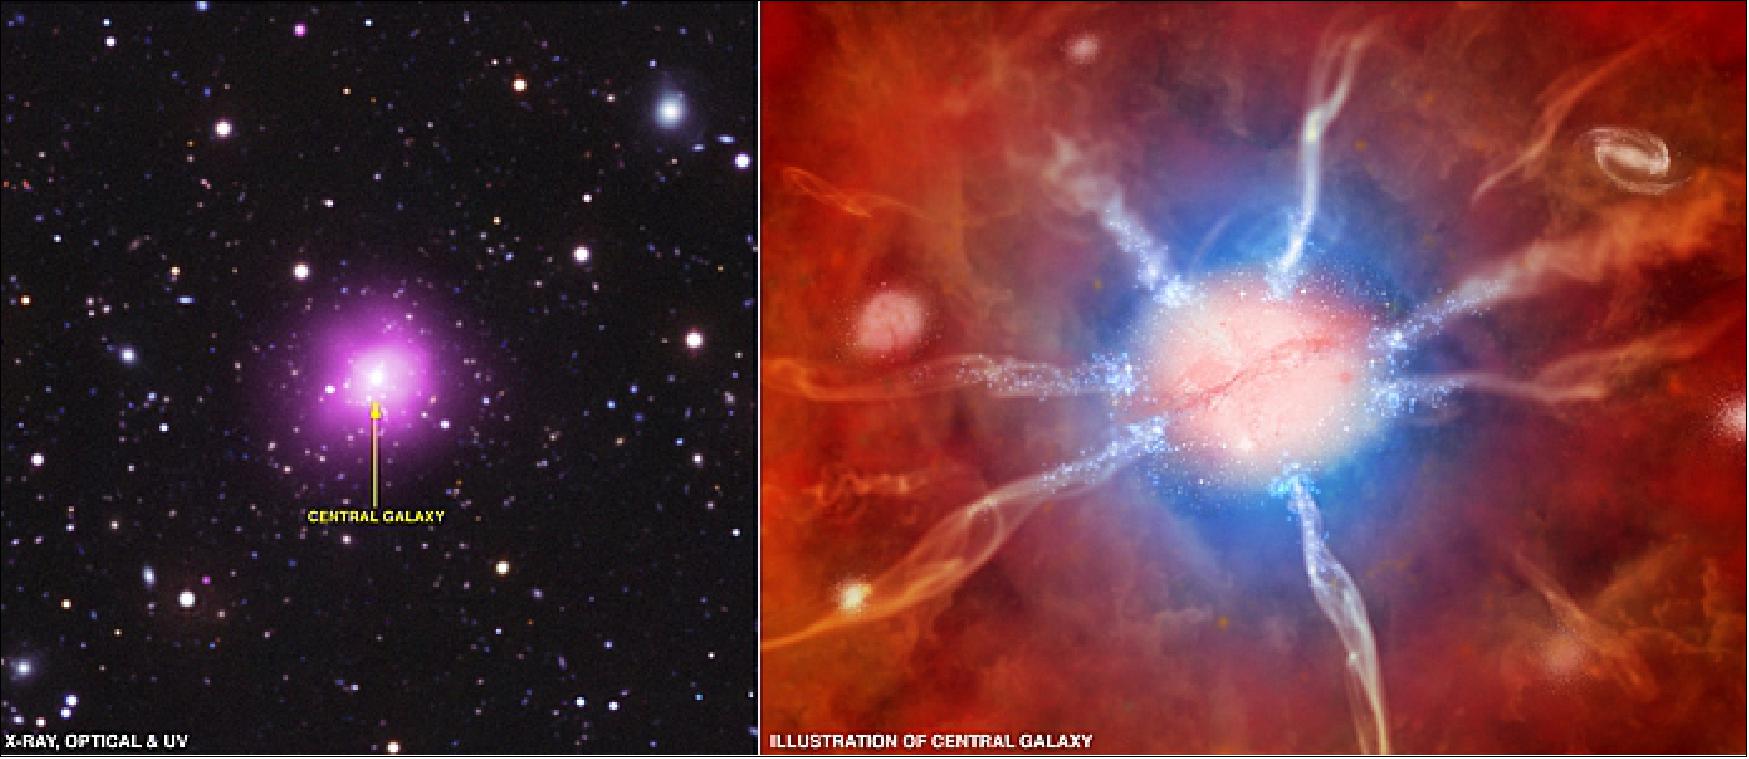 Figure 53: The image on the left shows the newly discovered Phoenix Cluster, located about 5.7 billion light years from Earth. This composite includes an X-ray image from NASA's Chandra X-ray Observatory in purple, an optical image from the 4m Blanco telescope in red, green and blue, and an ultraviolet (UV) image from NASA's Galaxy Evolution Explorer (GALEX) in blue. The Chandra data show hot gas in the cluster and the optical and UV images show galaxies in the cluster and in nearby parts of the sky (image credit: X-ray: NASA/CXC/MIT/M.McDonald; UV: NASA/JPL-Caltech/M.McDonald; Optical: AURA/NOAO/CTIO/MIT/M.McDonald; Illustration: NASA/CXC/M.Weiss)